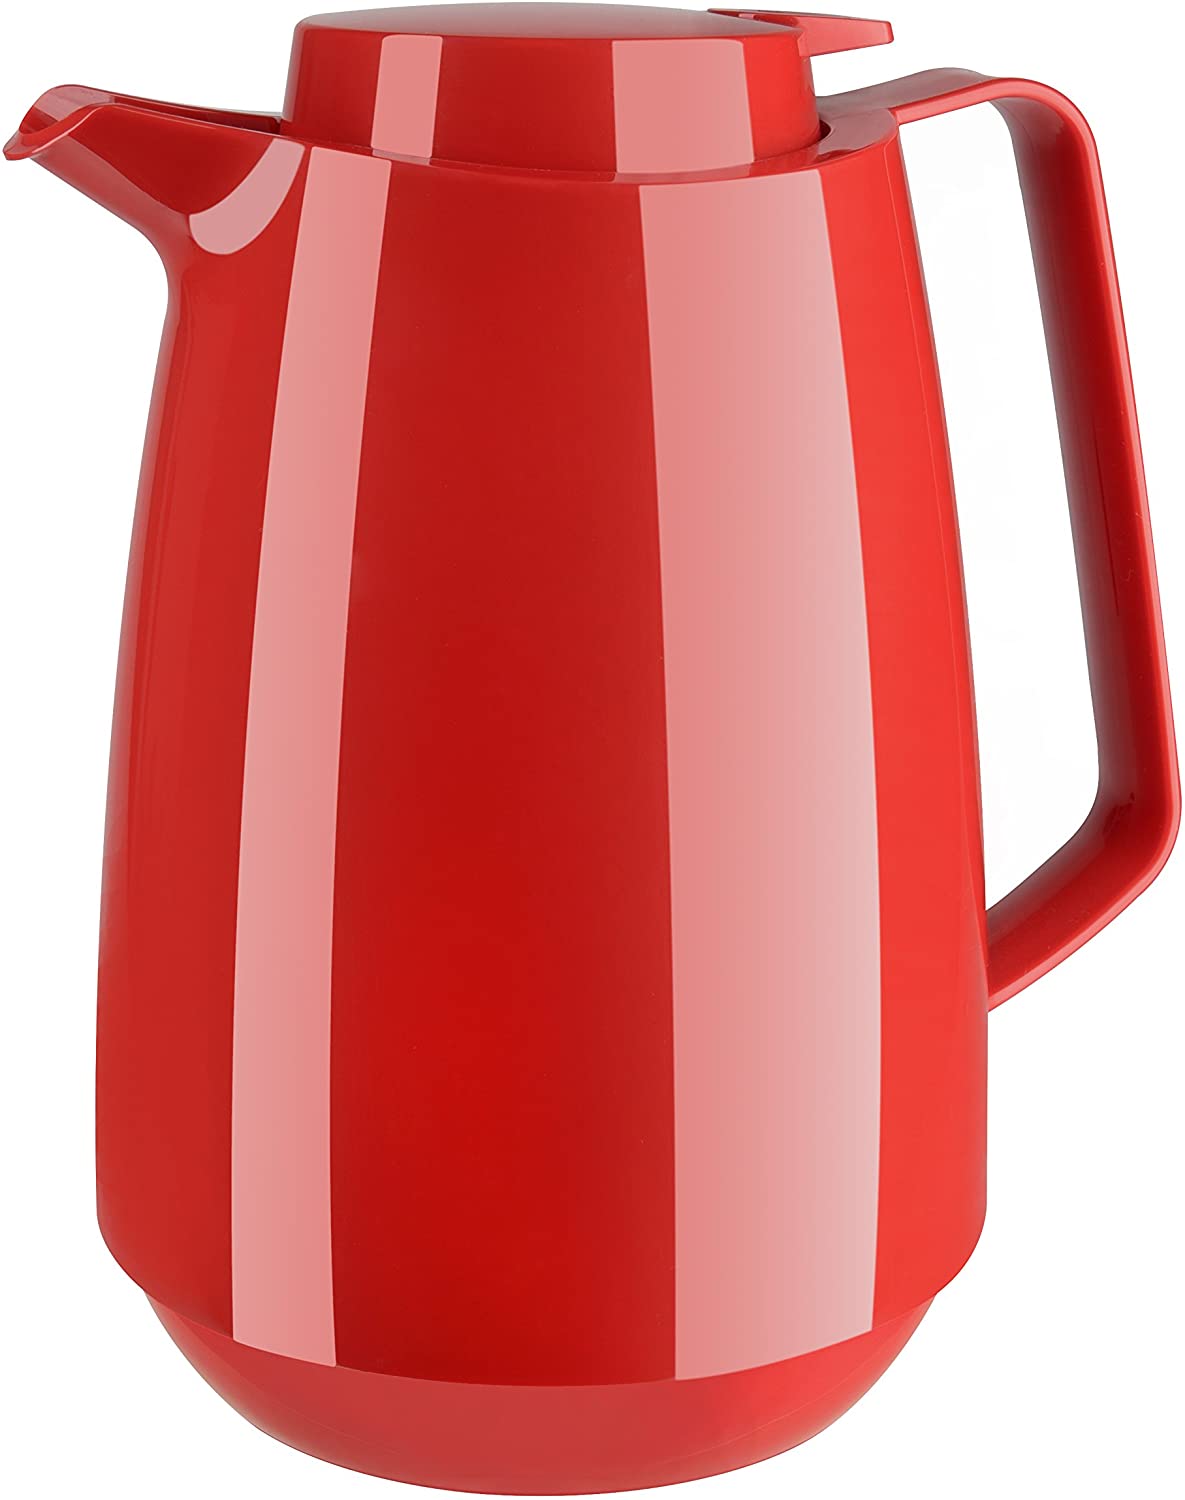 Emsa momento coffee, 515844 Thermos CAN 1 L, 100% airtight, 12 24 Standard hot / cold, Red